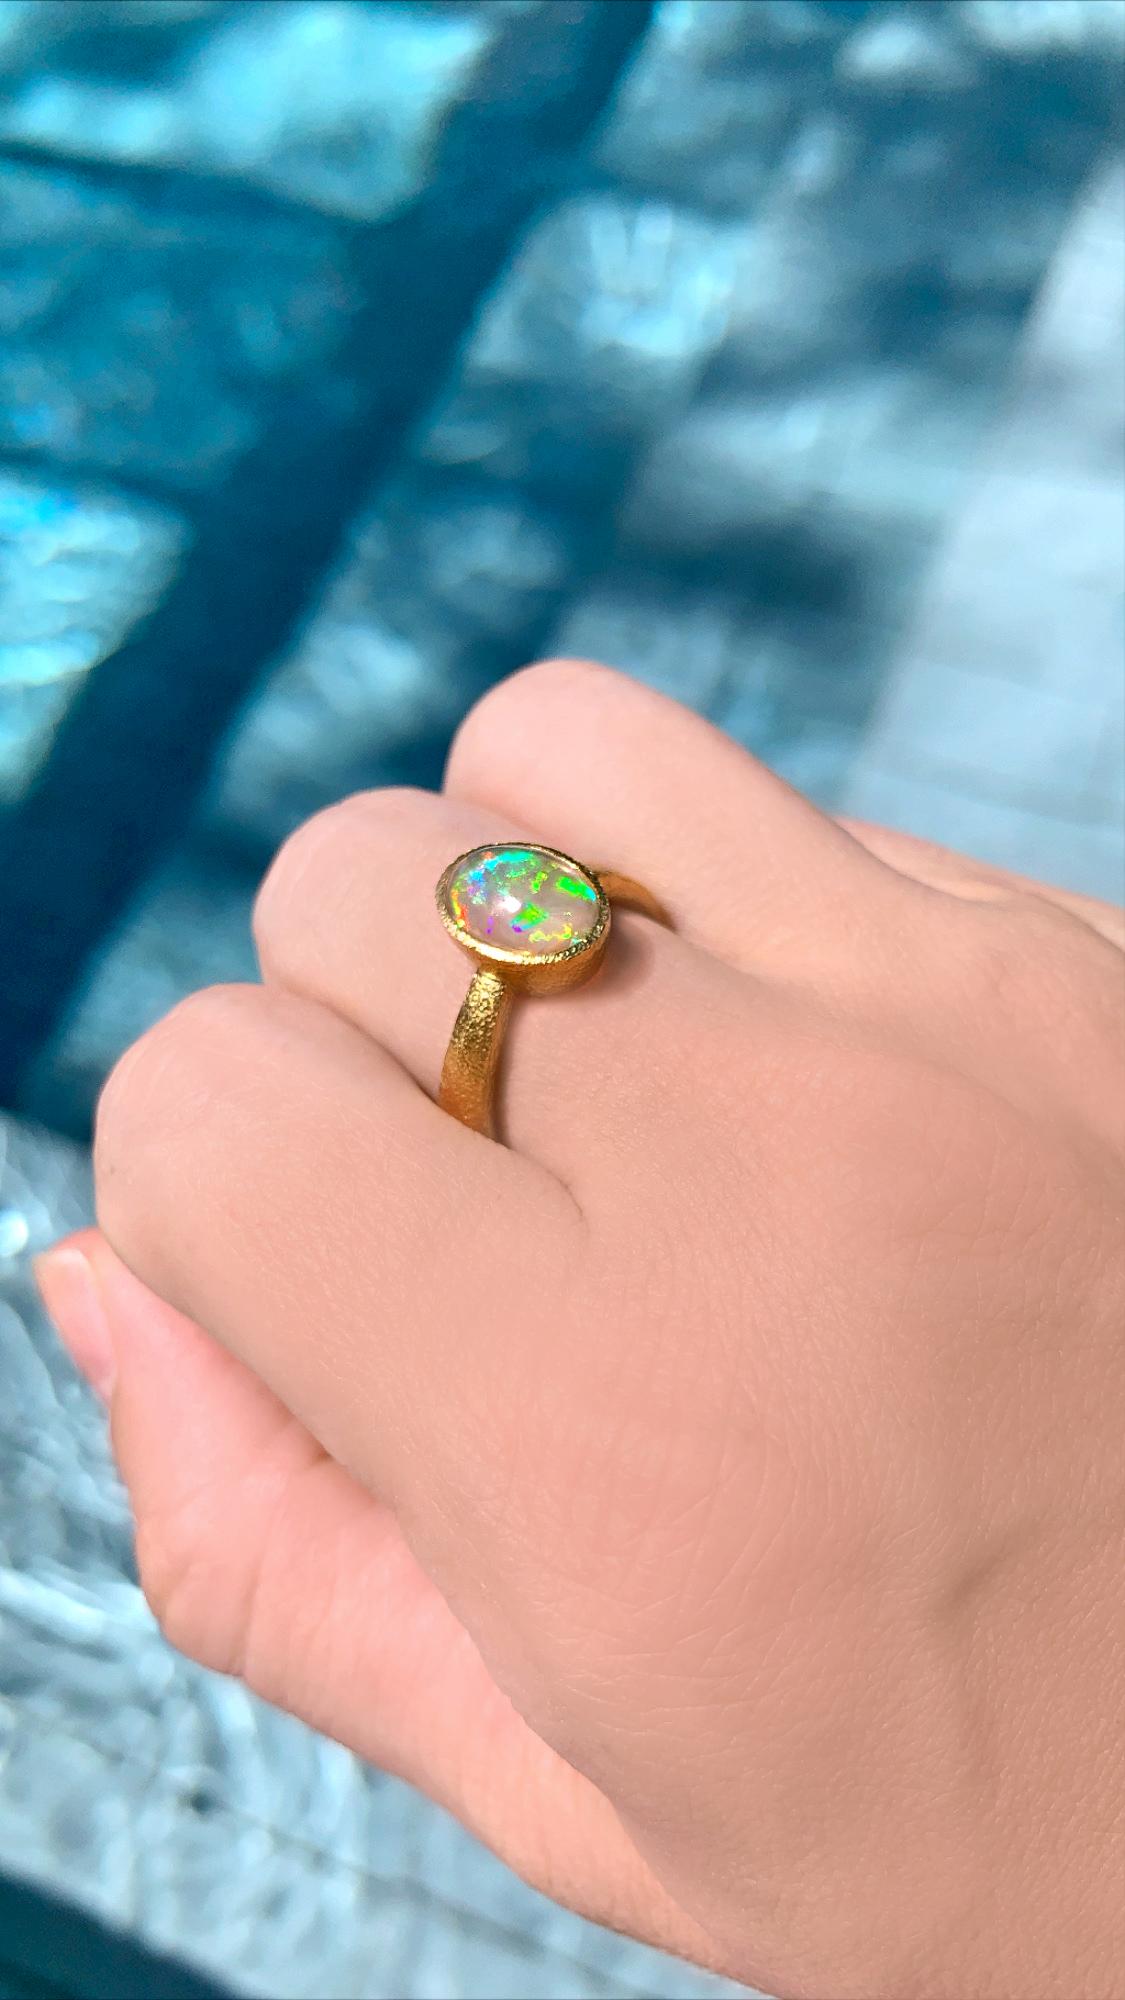 One of a Kind Ring by renowned jewelry maker Devta Doolan featuring an extraordinary, top quality Mexican crystal opal, electrified from within by a full spectrum rainbow flash. The gem opal is bezel-set in the artist's signature-finished 22k yellow